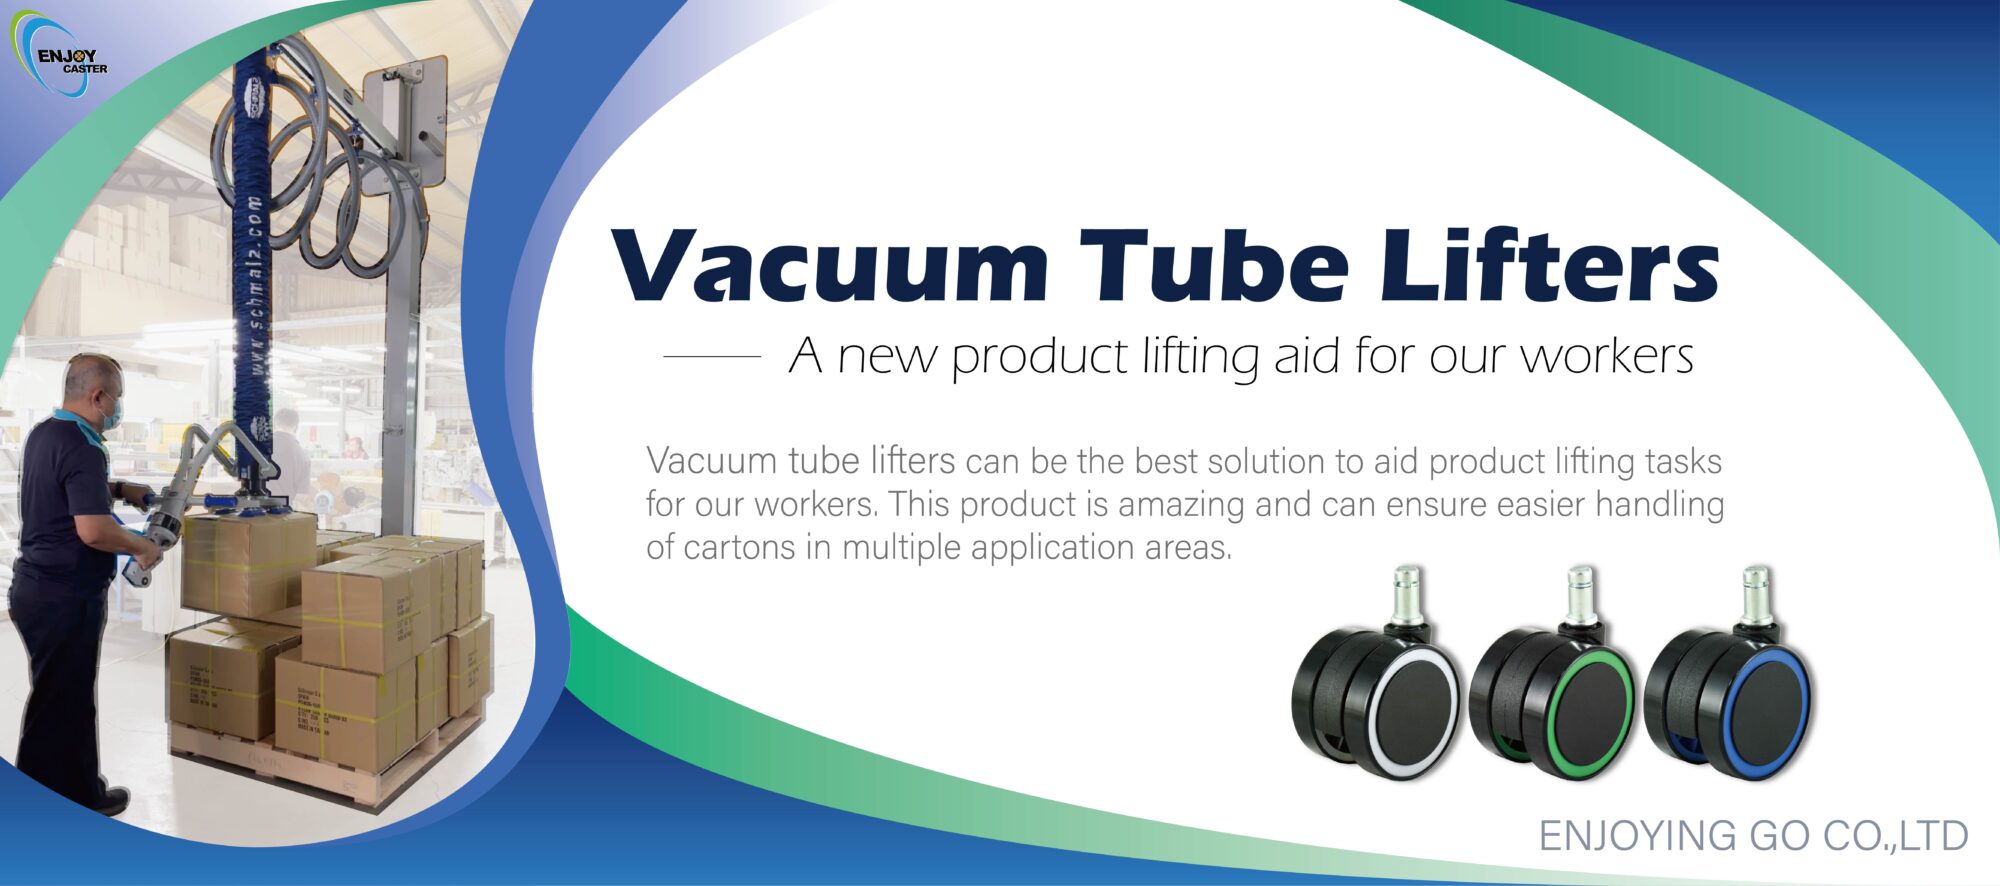 Vacuum Tube Lifters: A new product lifting aid for our workers